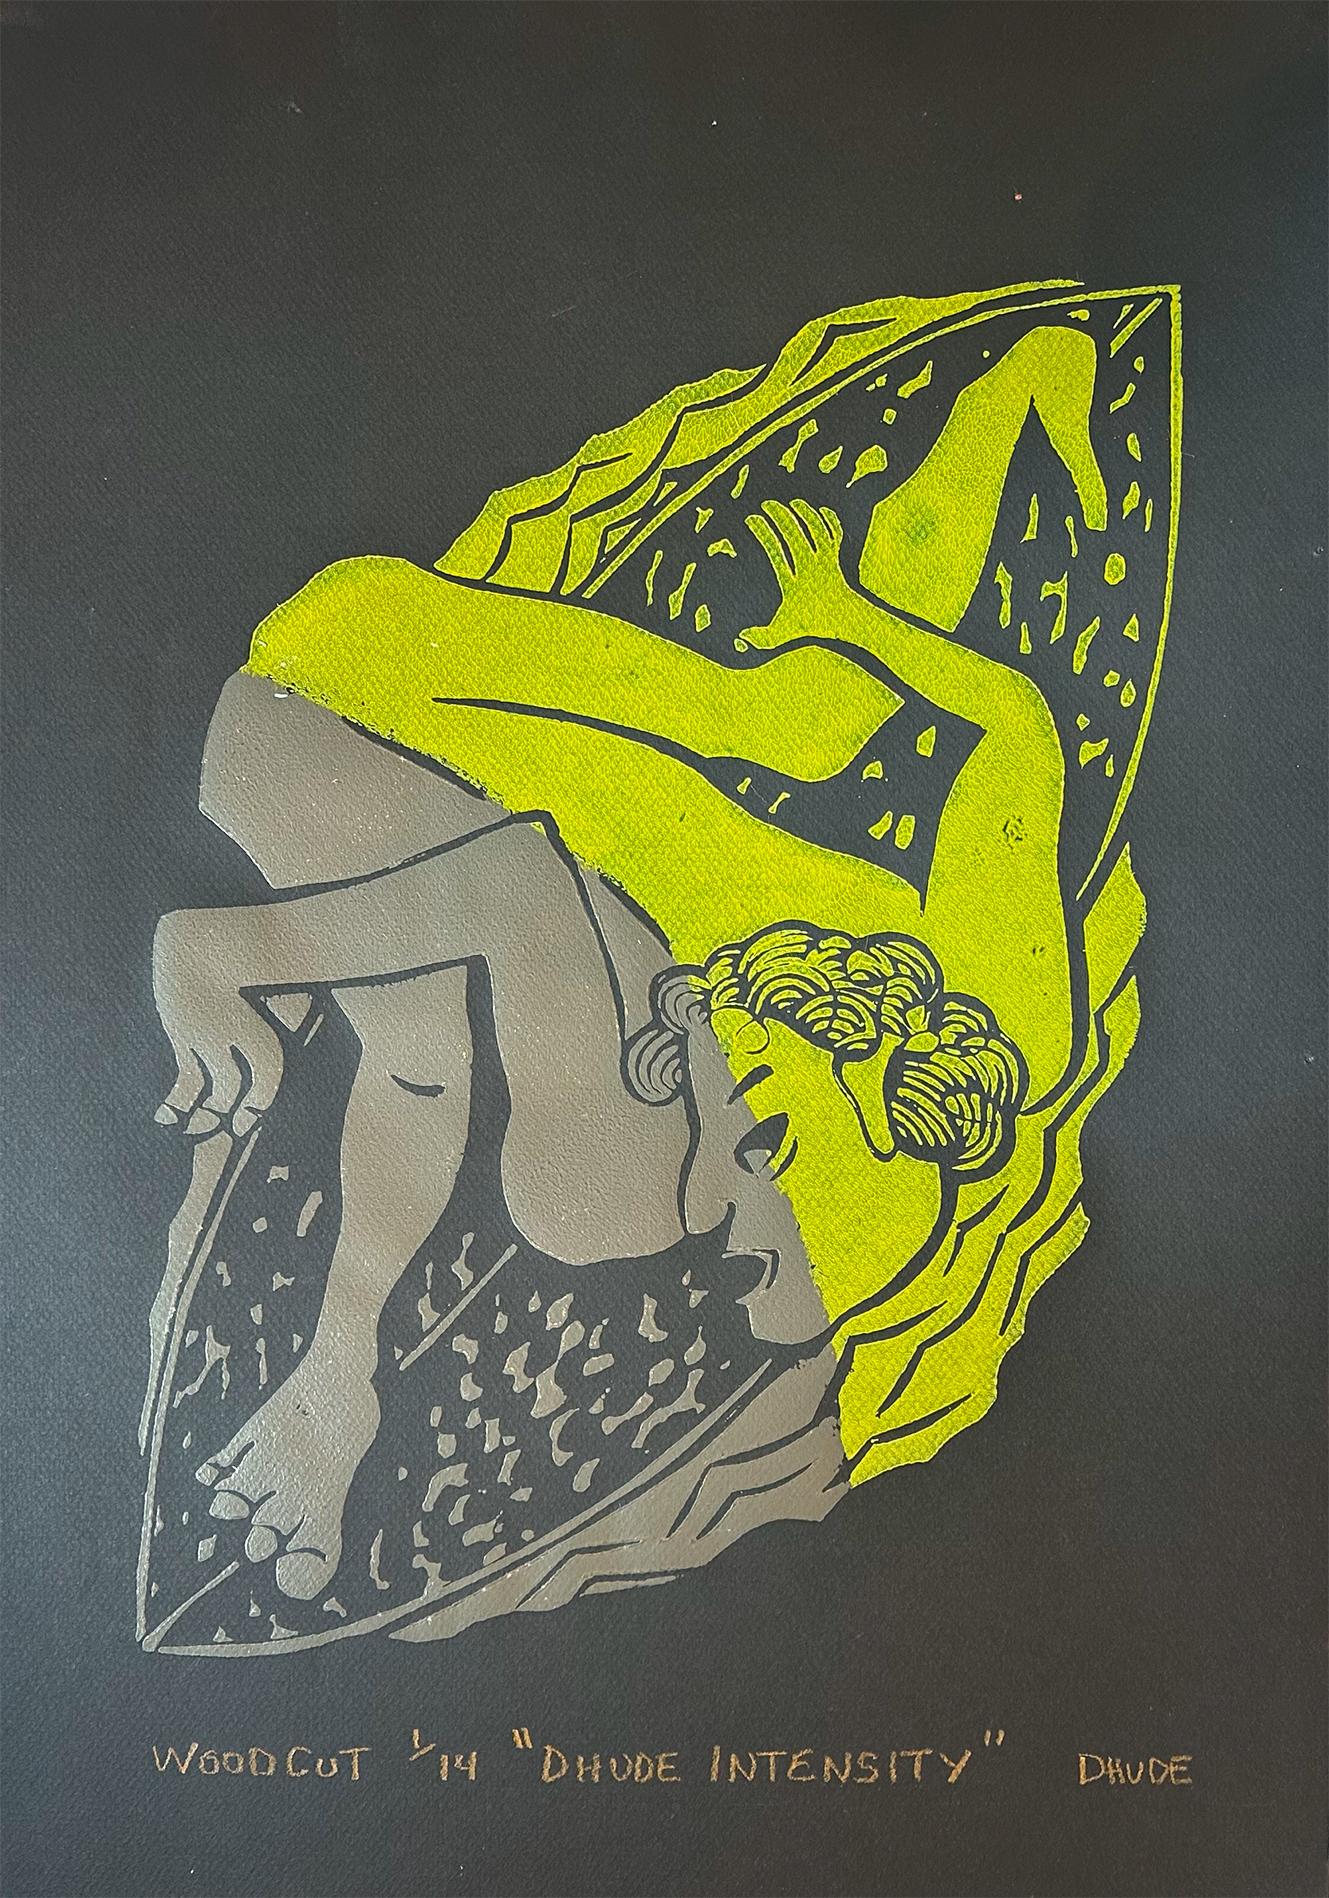 Dhude Intensity - Surfing Art - Figurative - Woodcut Print By Marc Zimmerman

Limited Edition 01/04

This masterwork is exhibited in the Zimmerman Gallery, Carmel CA.

Immerse yourself in the captivating world of surfing and ocean vibes with Marc